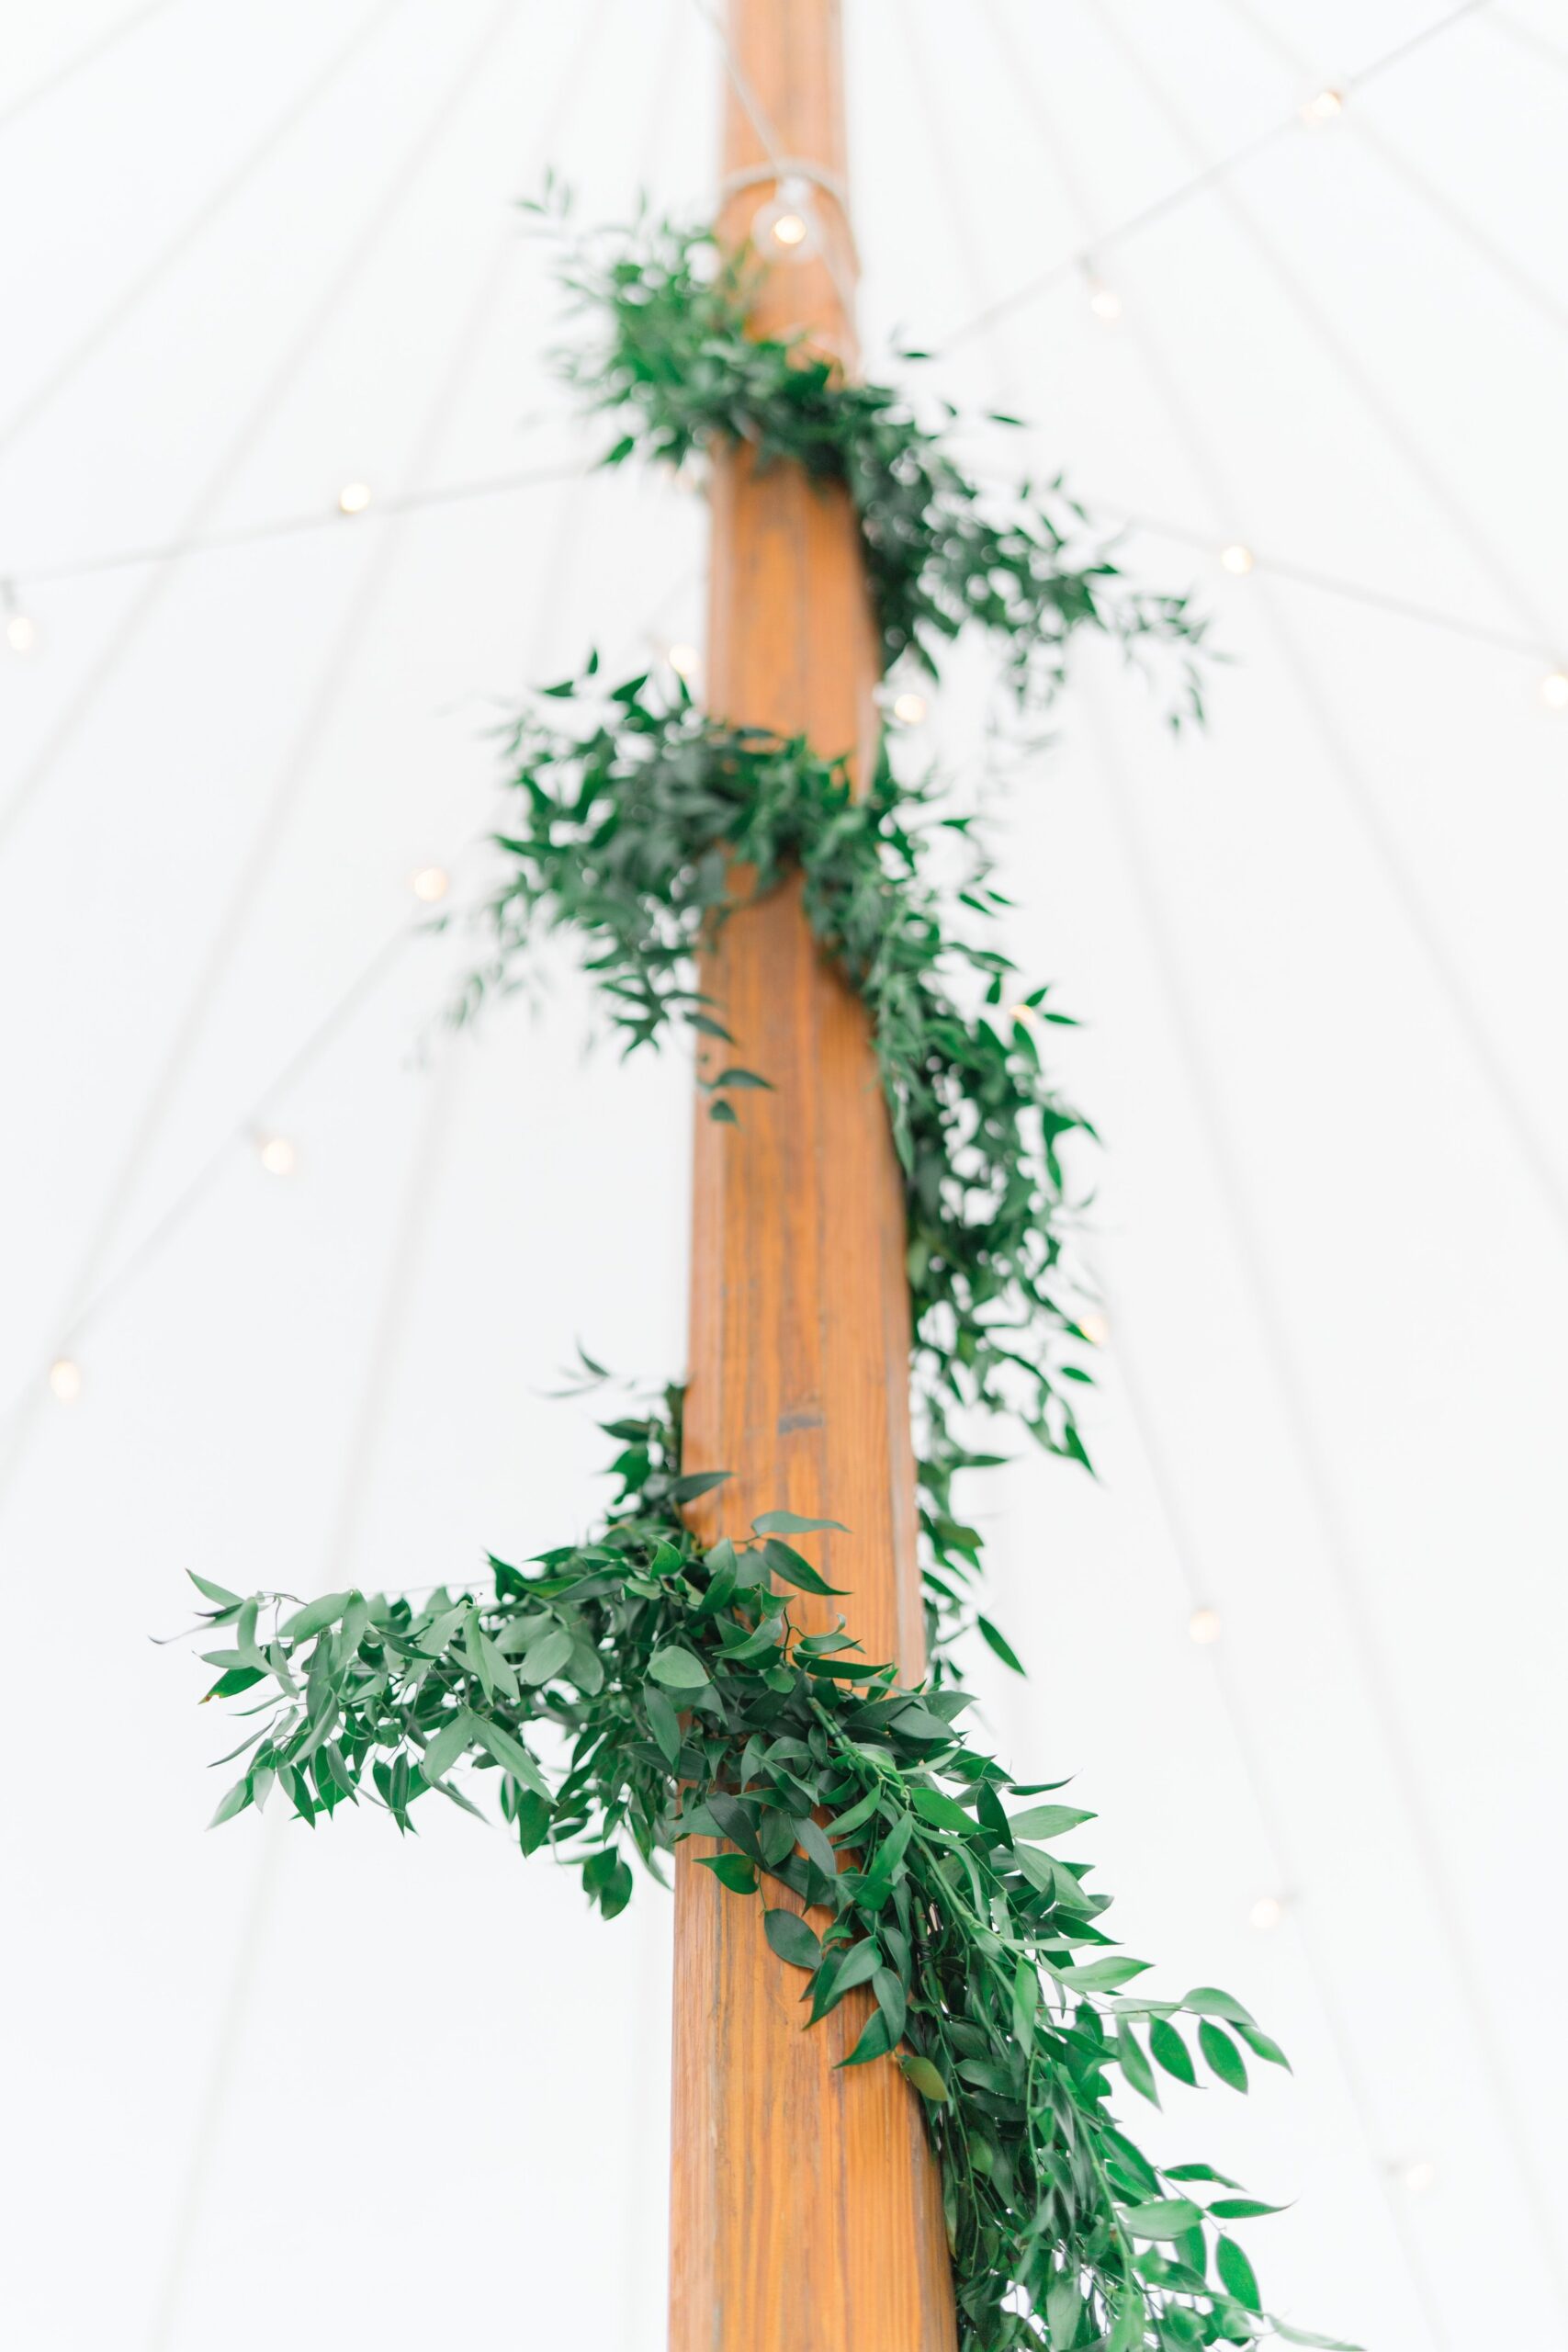 Wooden tent pole wrapped in lush greenery. Boston wedding photographer.